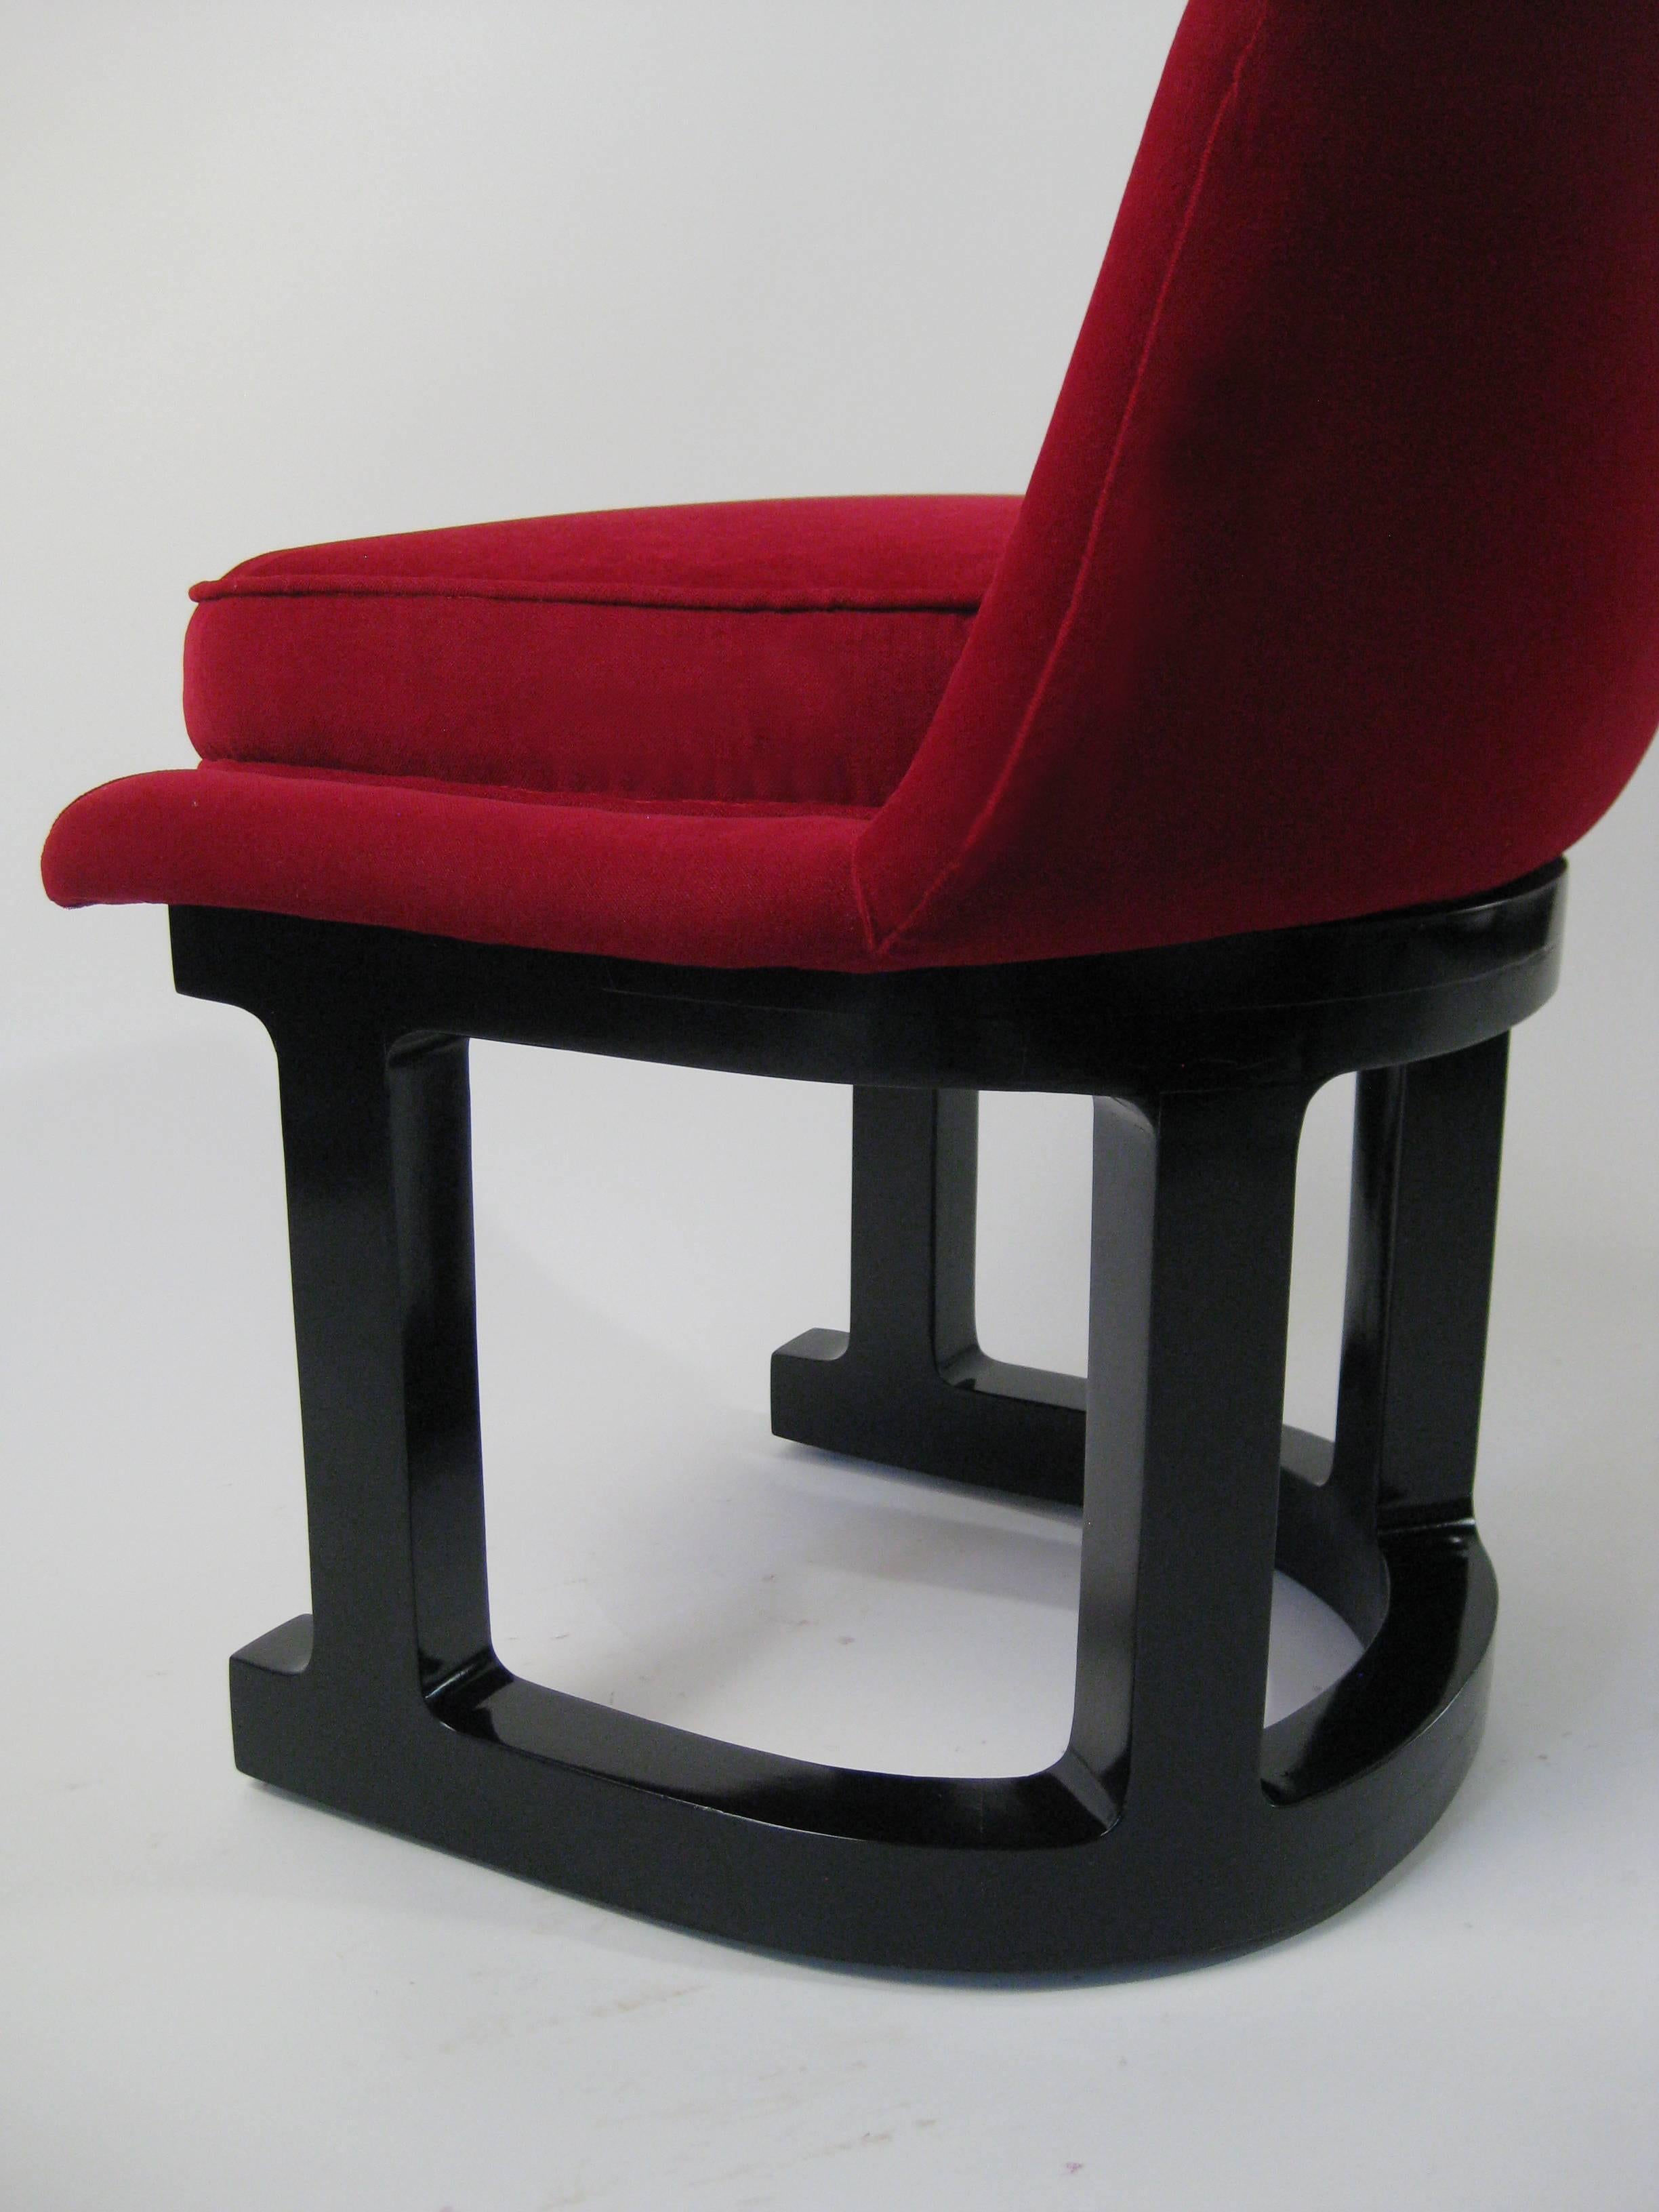 Set of Four Chairs Fiberglass Frame, Velvet Leather and Lacquer, USA, circa 1960 For Sale 2